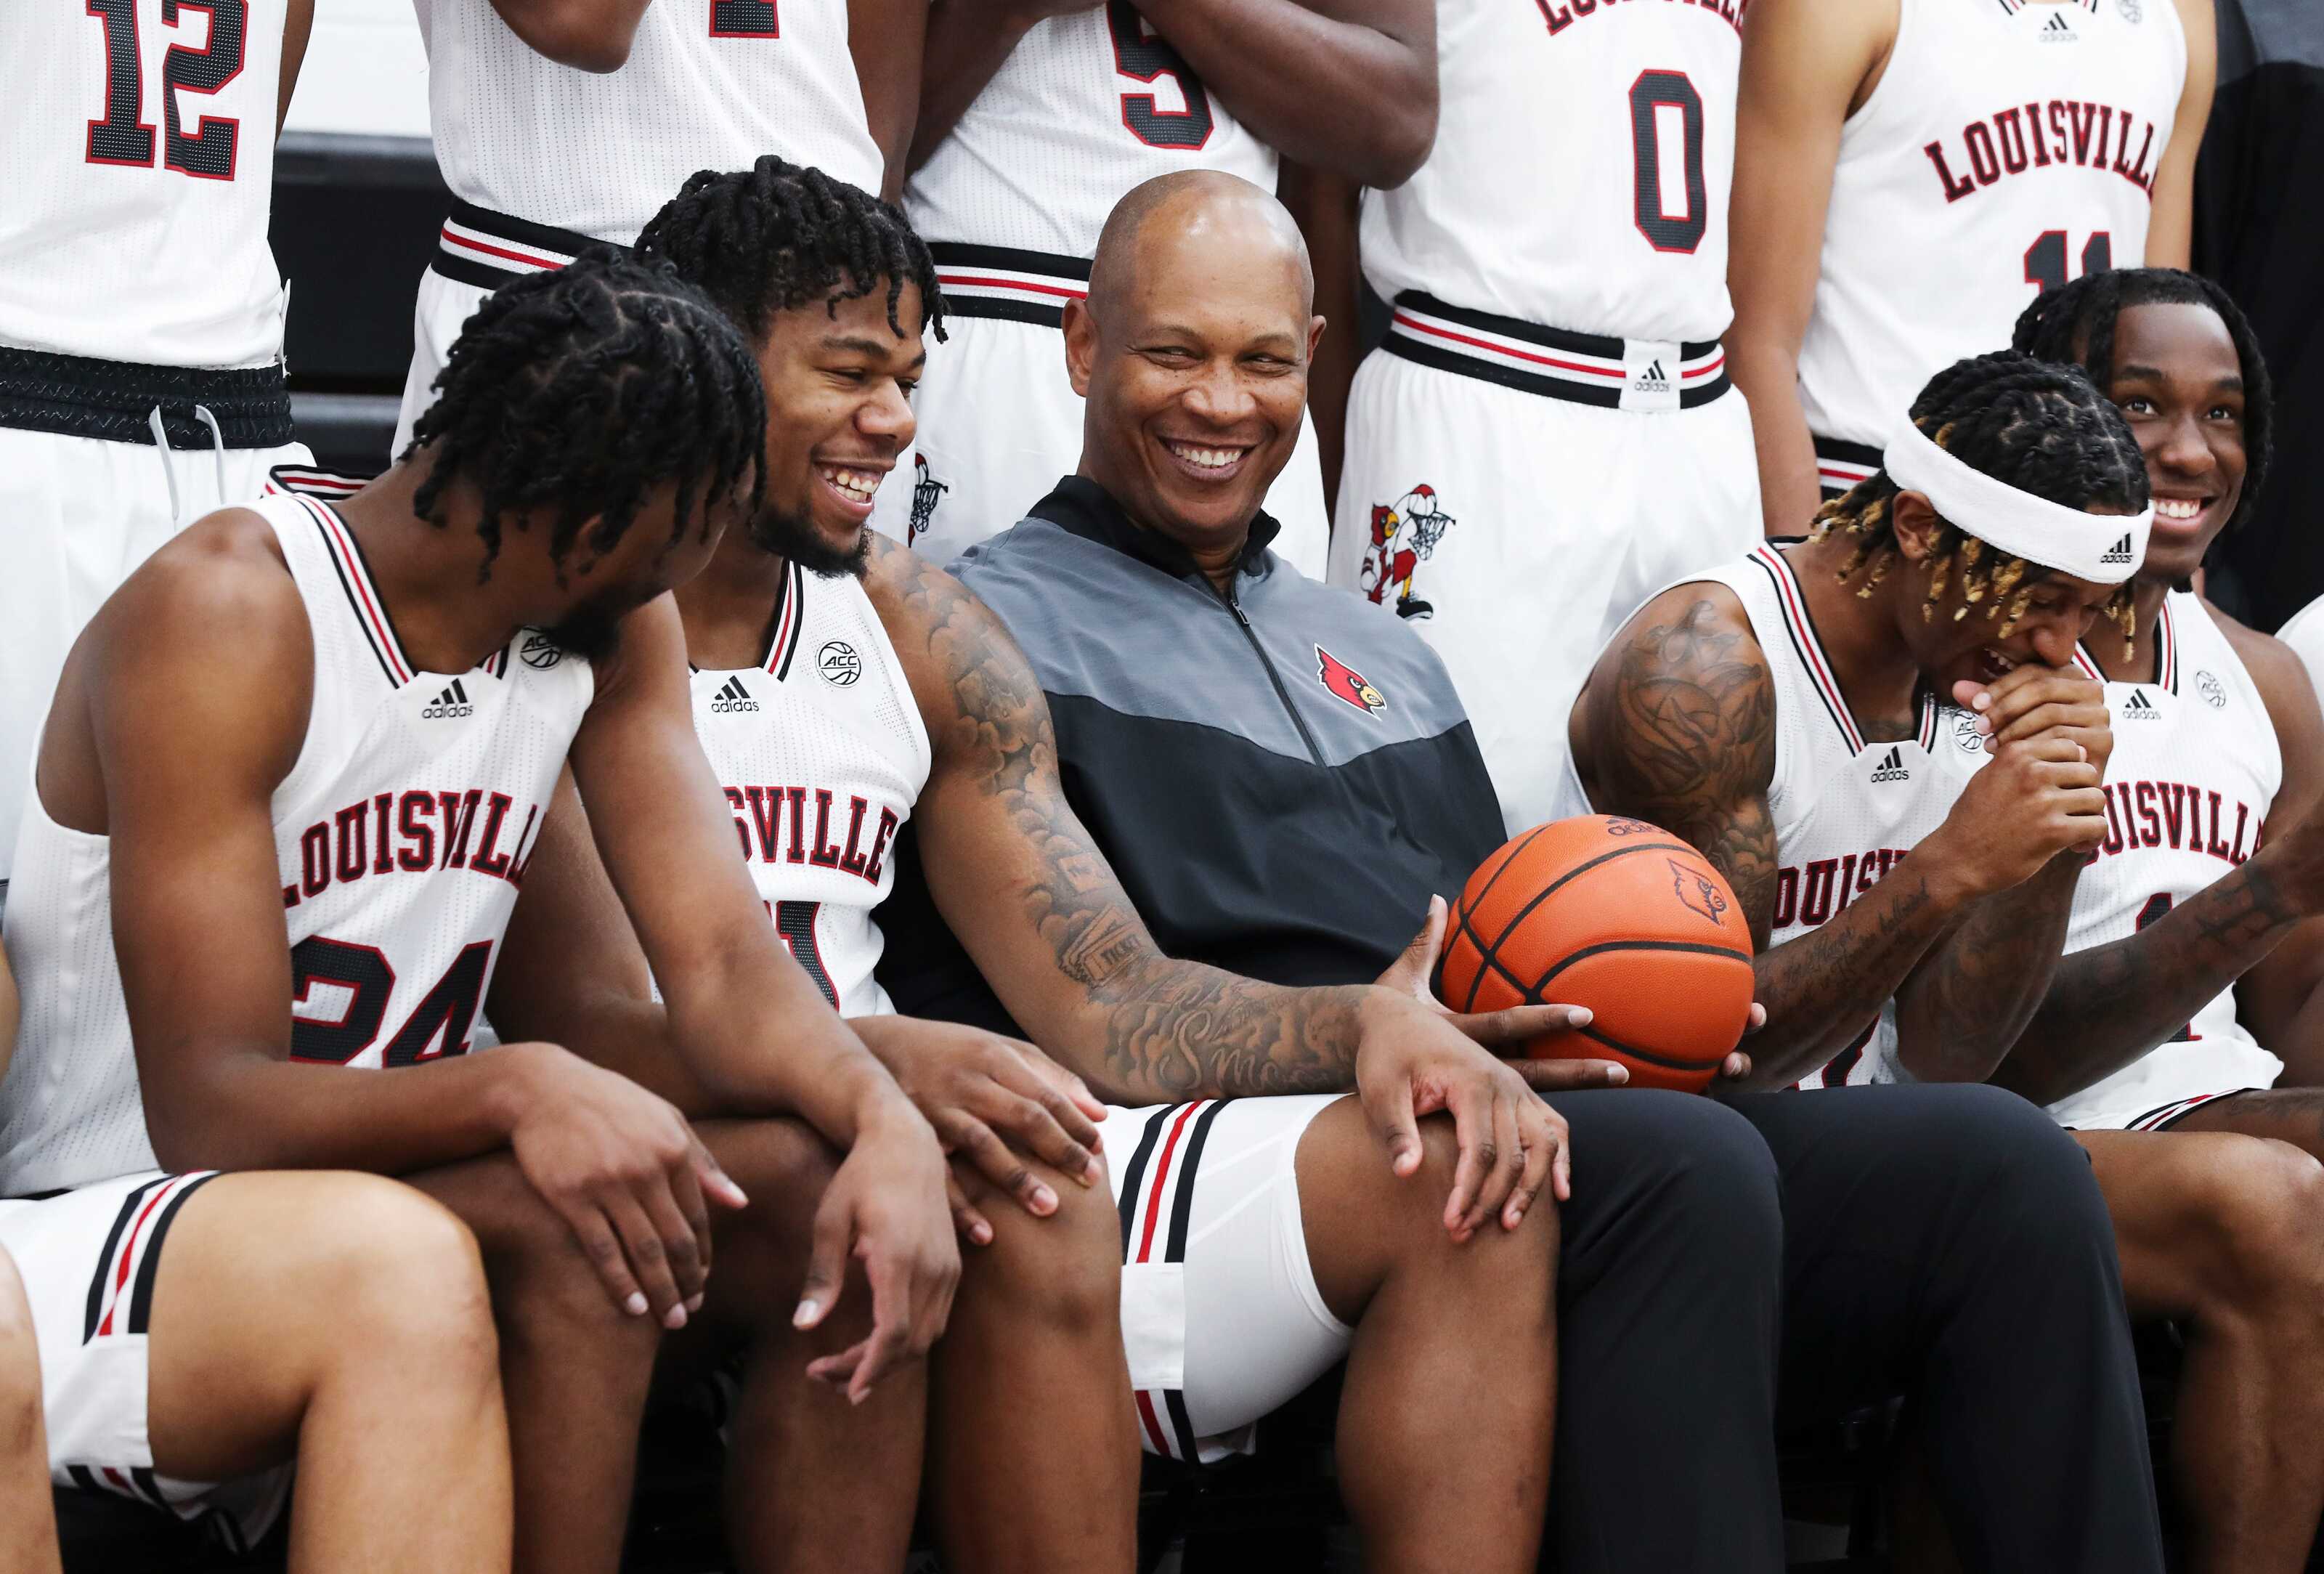 Louisville Cardinals Basketball Season Preview 2022-2023  The College  Basketball Experience (Ep. 175) - Sports Gambling Podcast